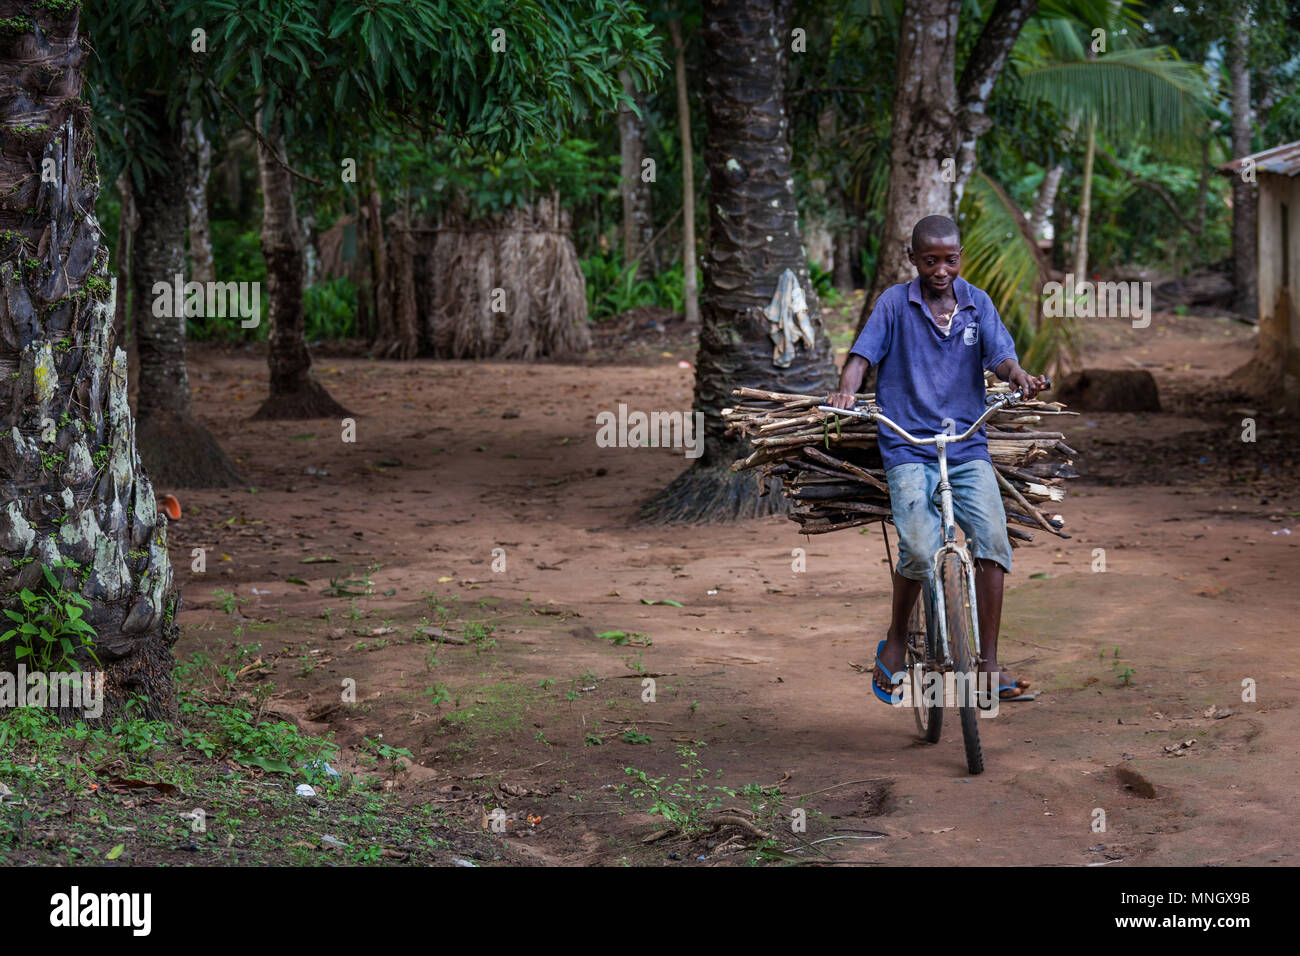 Yongoro, Sierra Leone - June 04, 2013: West Africa, unknown boy carries wood with a bicycle in the village in front of the capital Freetown, SIetrra L Stock Photo